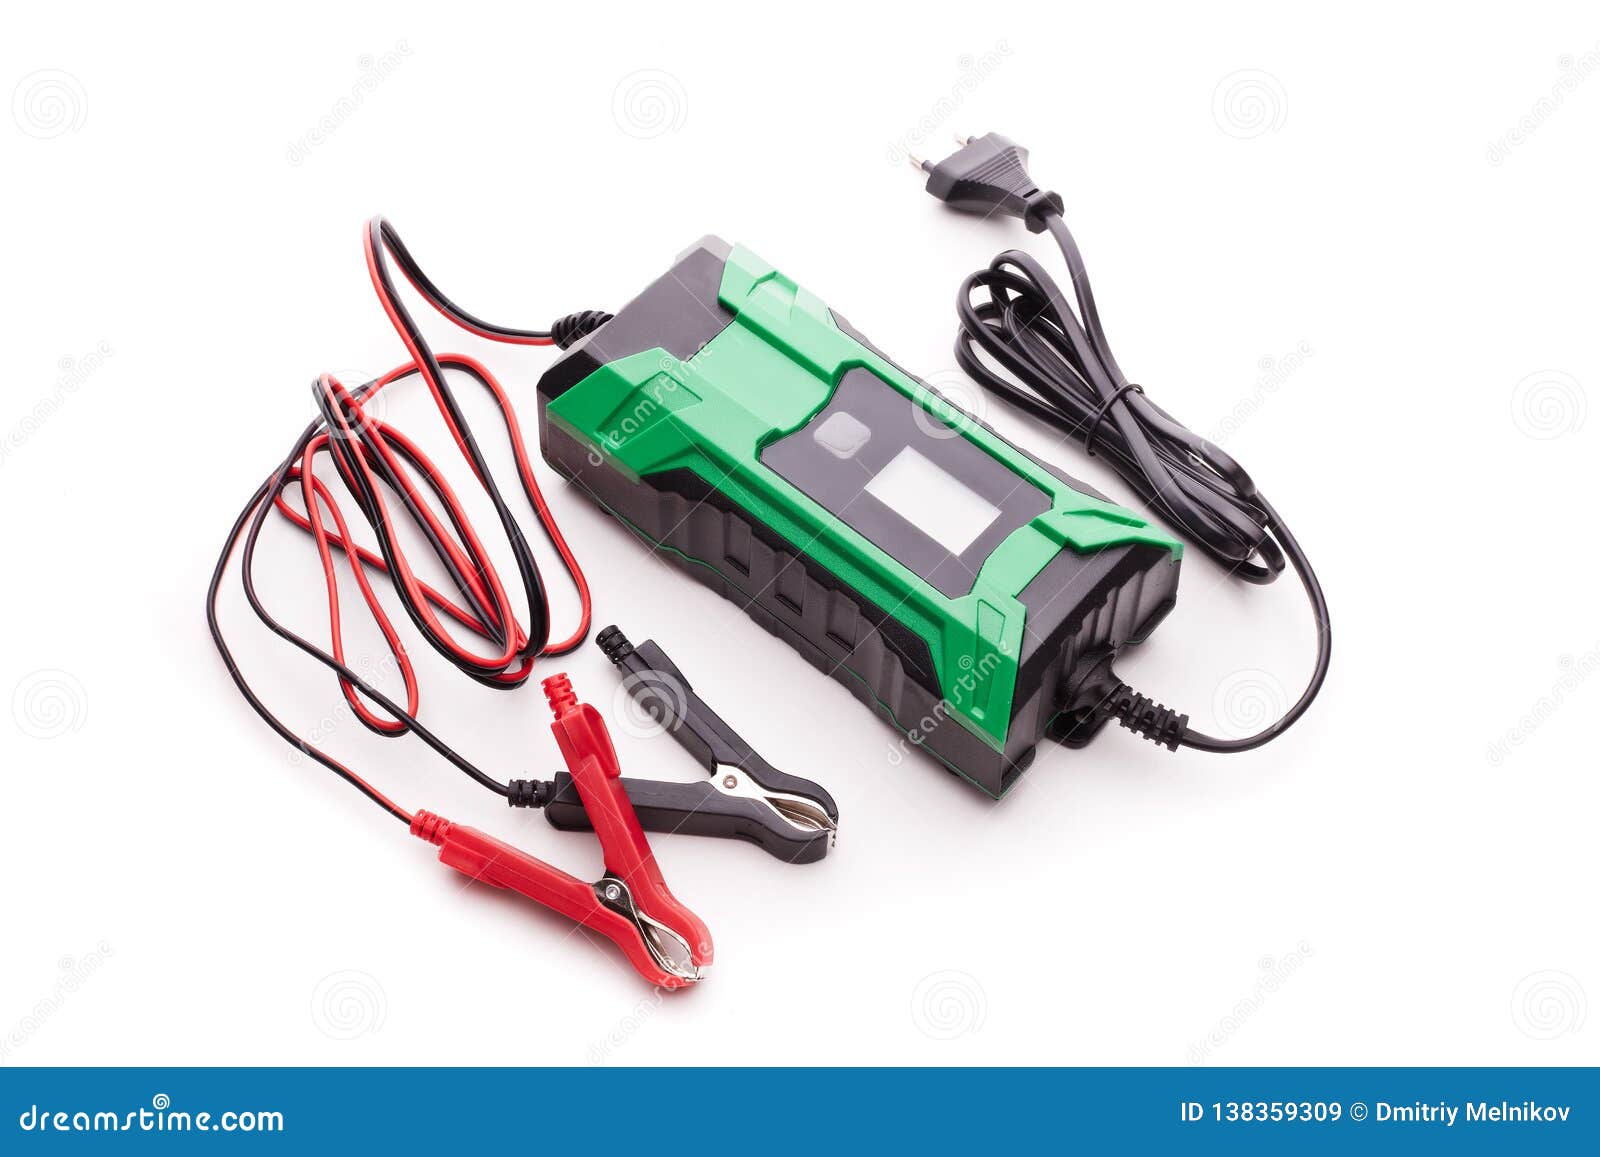 Car battery charger stock image. Image of diagnostic - 138359309